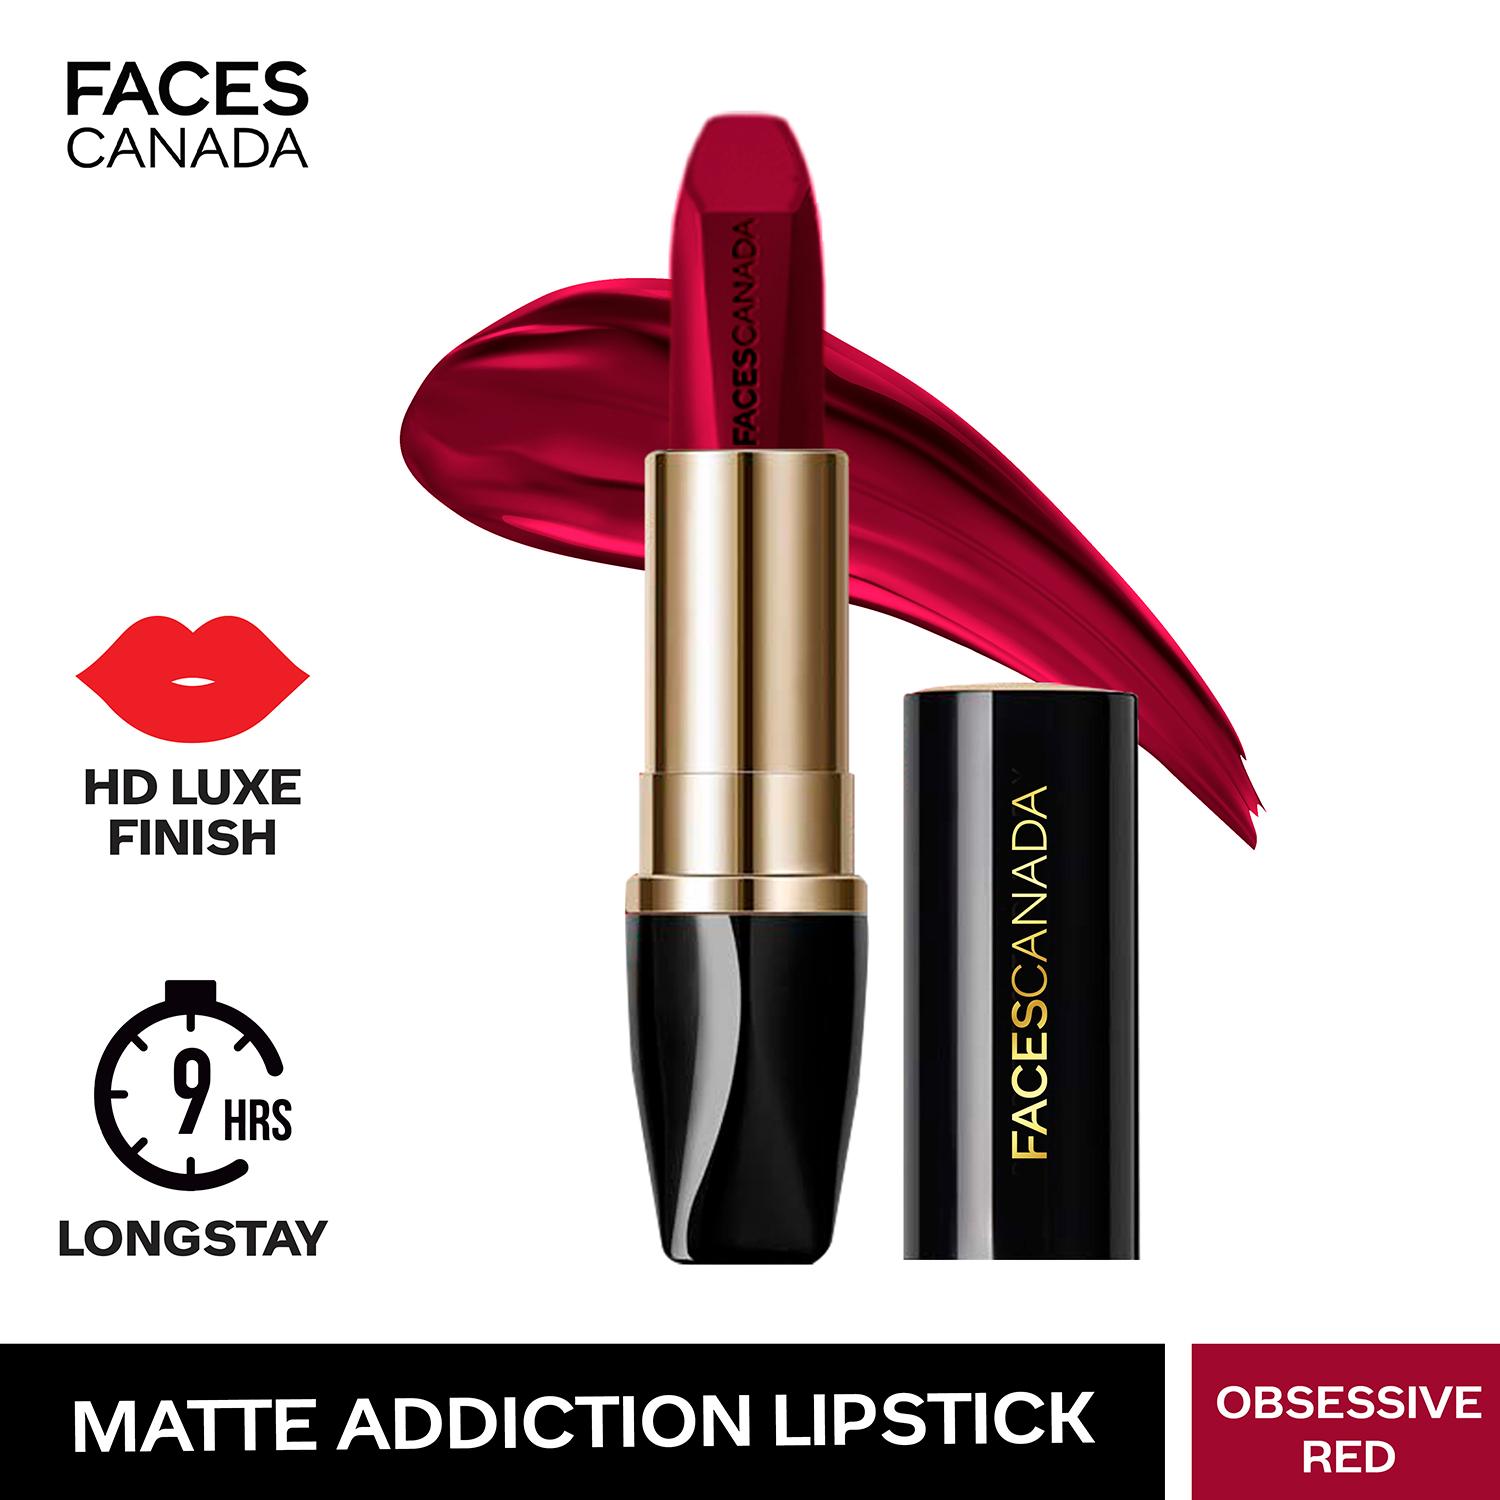 Faces Canada | Faces Canada Matte Addiction Lipstick, 9HR Stay, HD Finish, Intense Color - Obsessive Red (3.7 g)